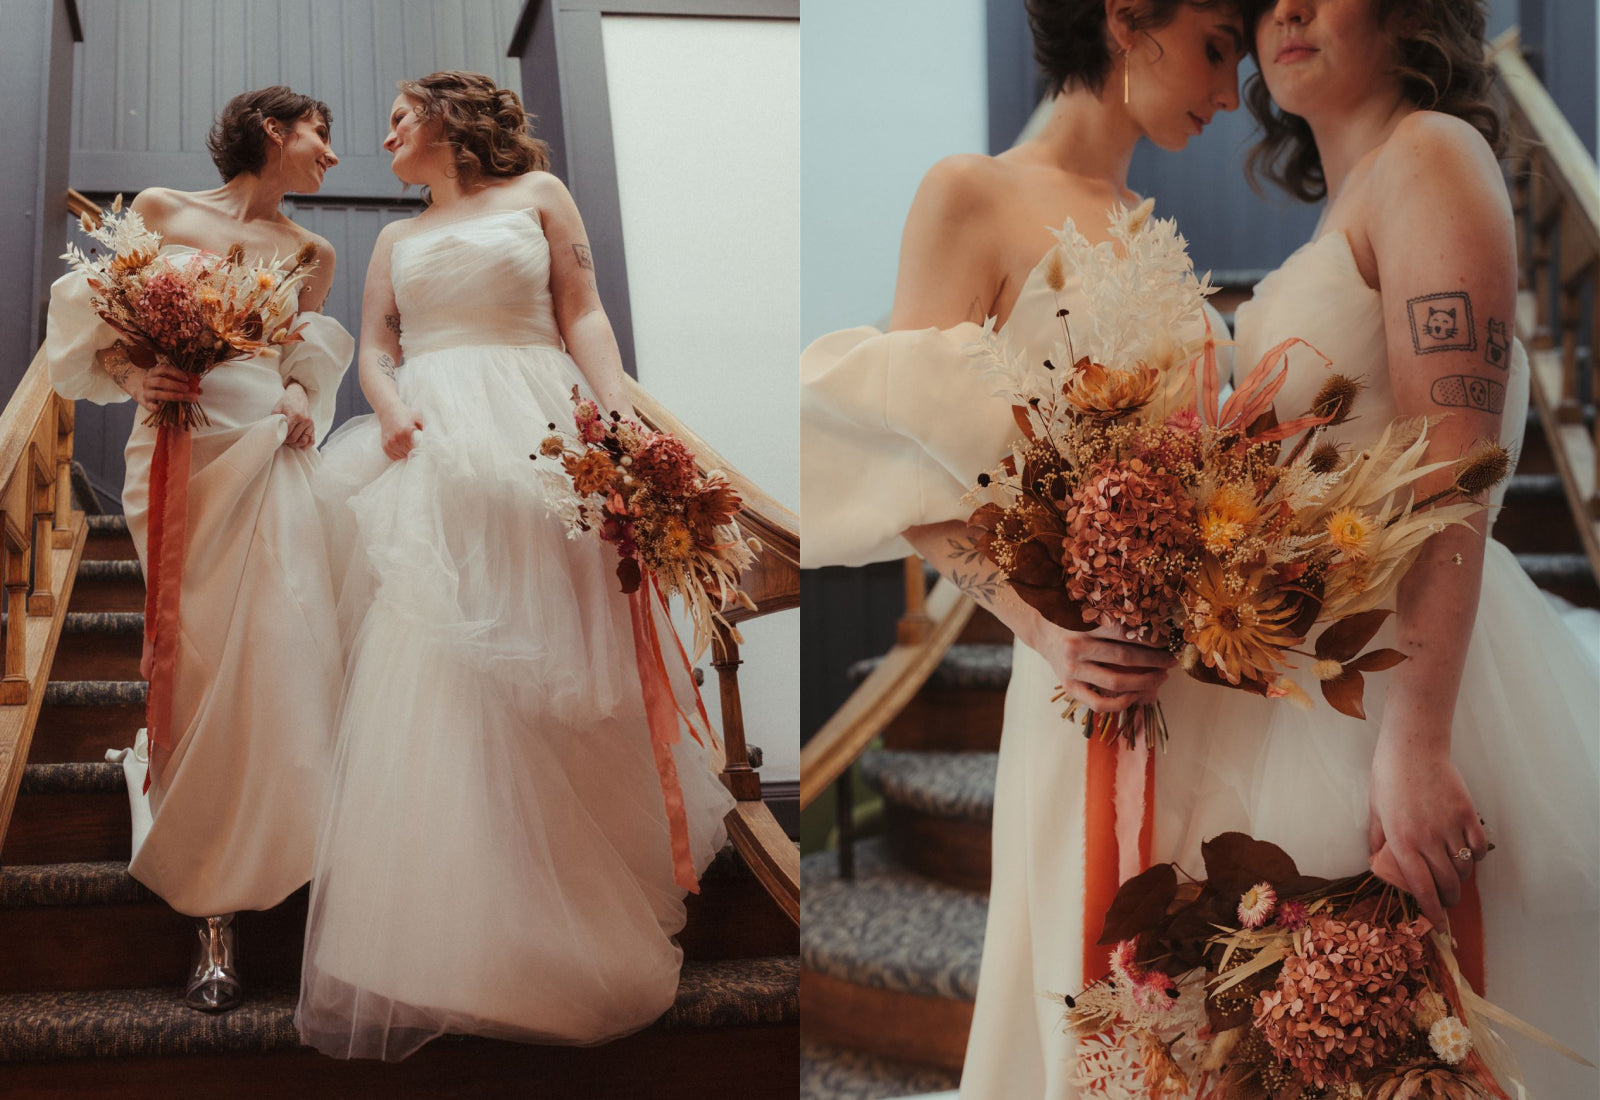 Two photos each of two brides holding bouquets of dried flowers